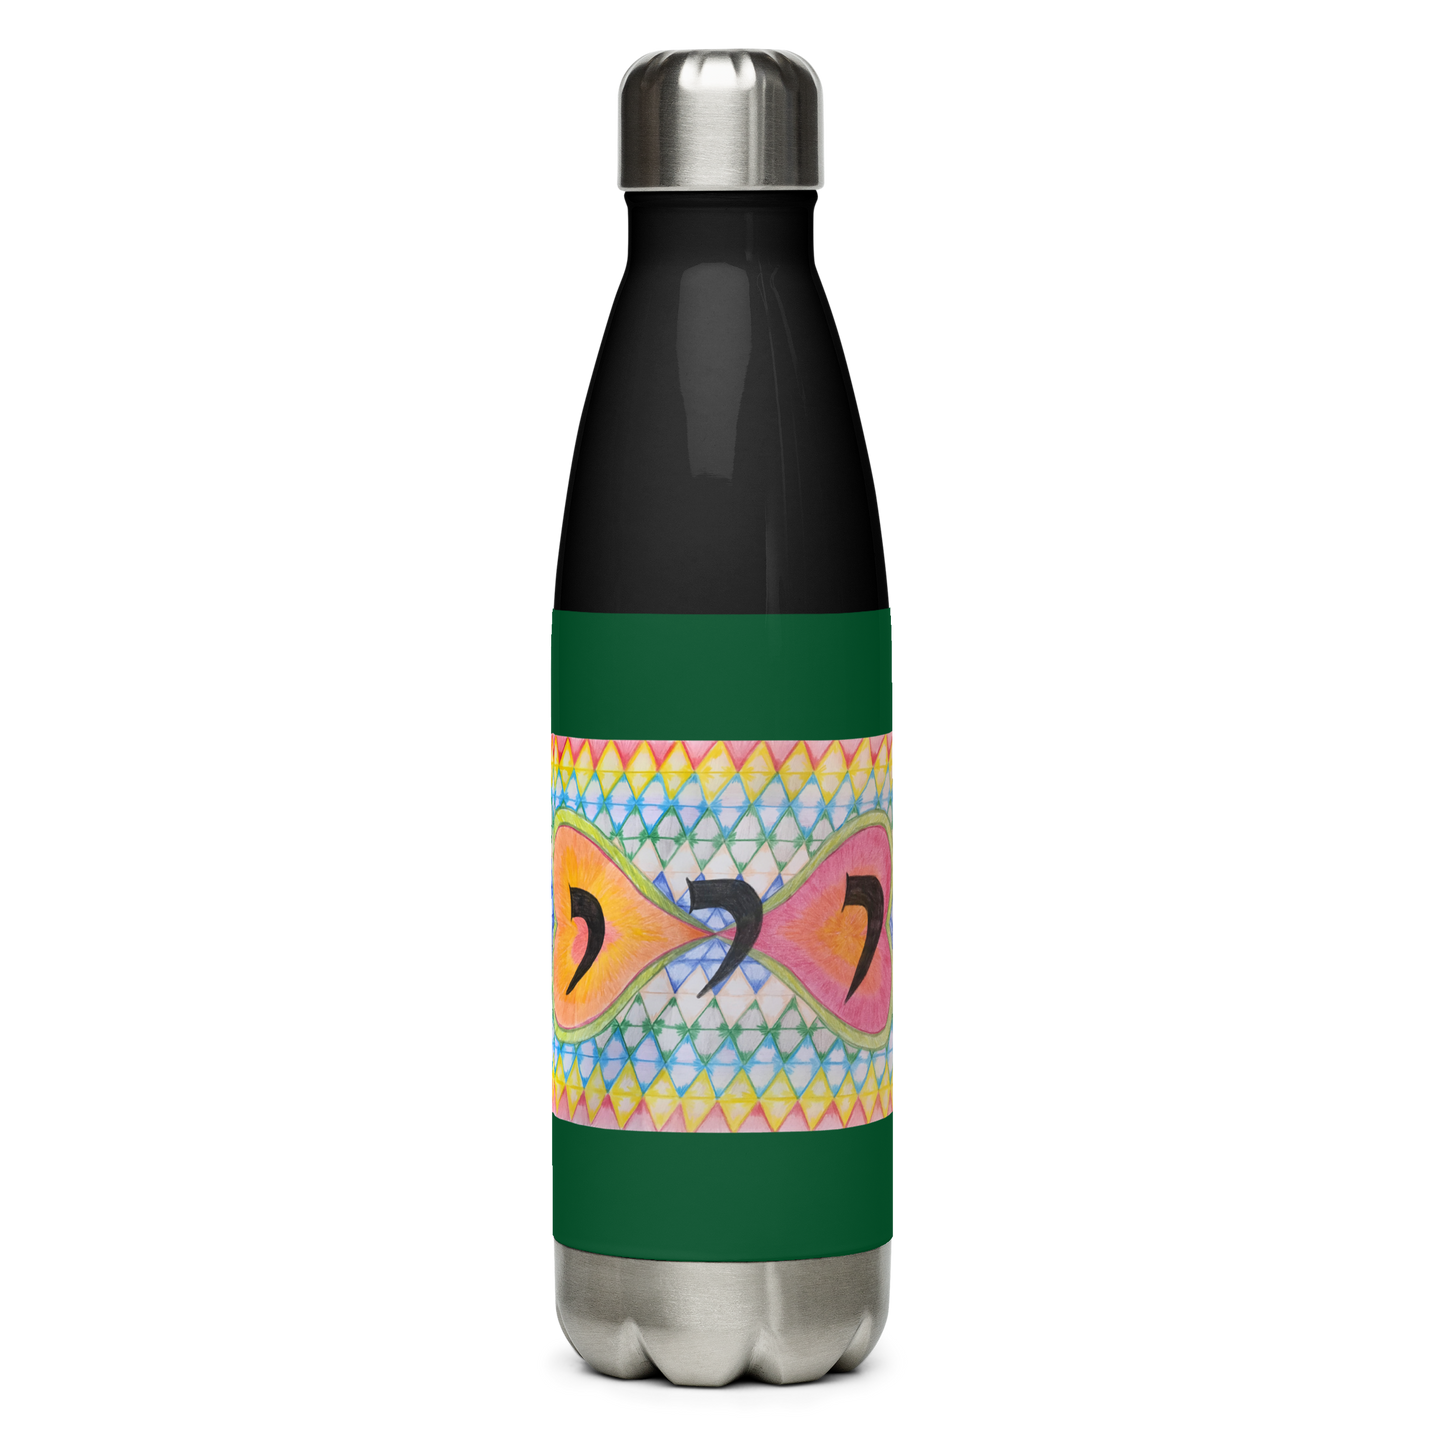 Stainless-Steel-Water-Bottle-17oz-Promote-Healthy-Relationships-(72 Names-of-God-Yud-Yud-Yud)-1-137online.com